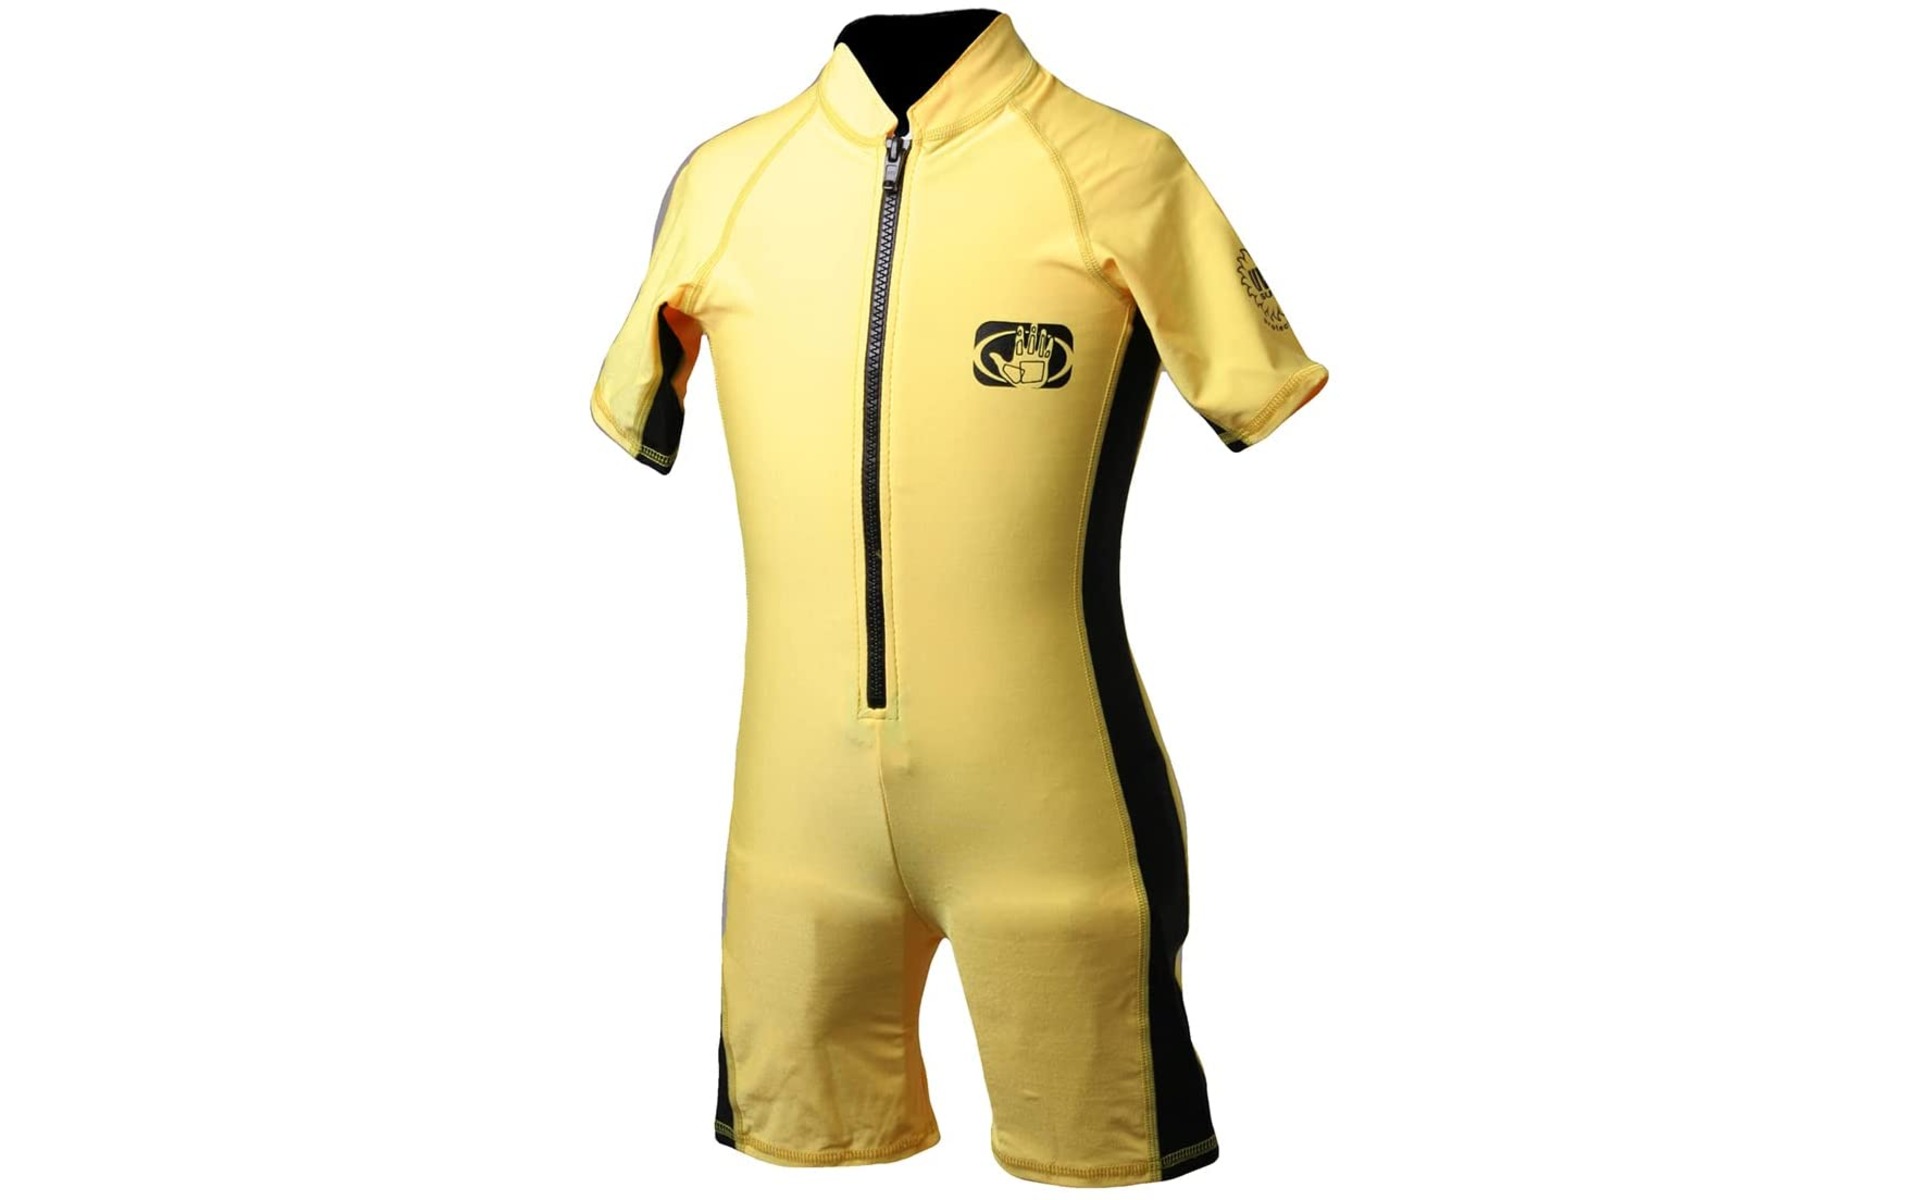 Childs Shorty Wetsuit, 8oz Lycra, Front Zip, Black/Yellow